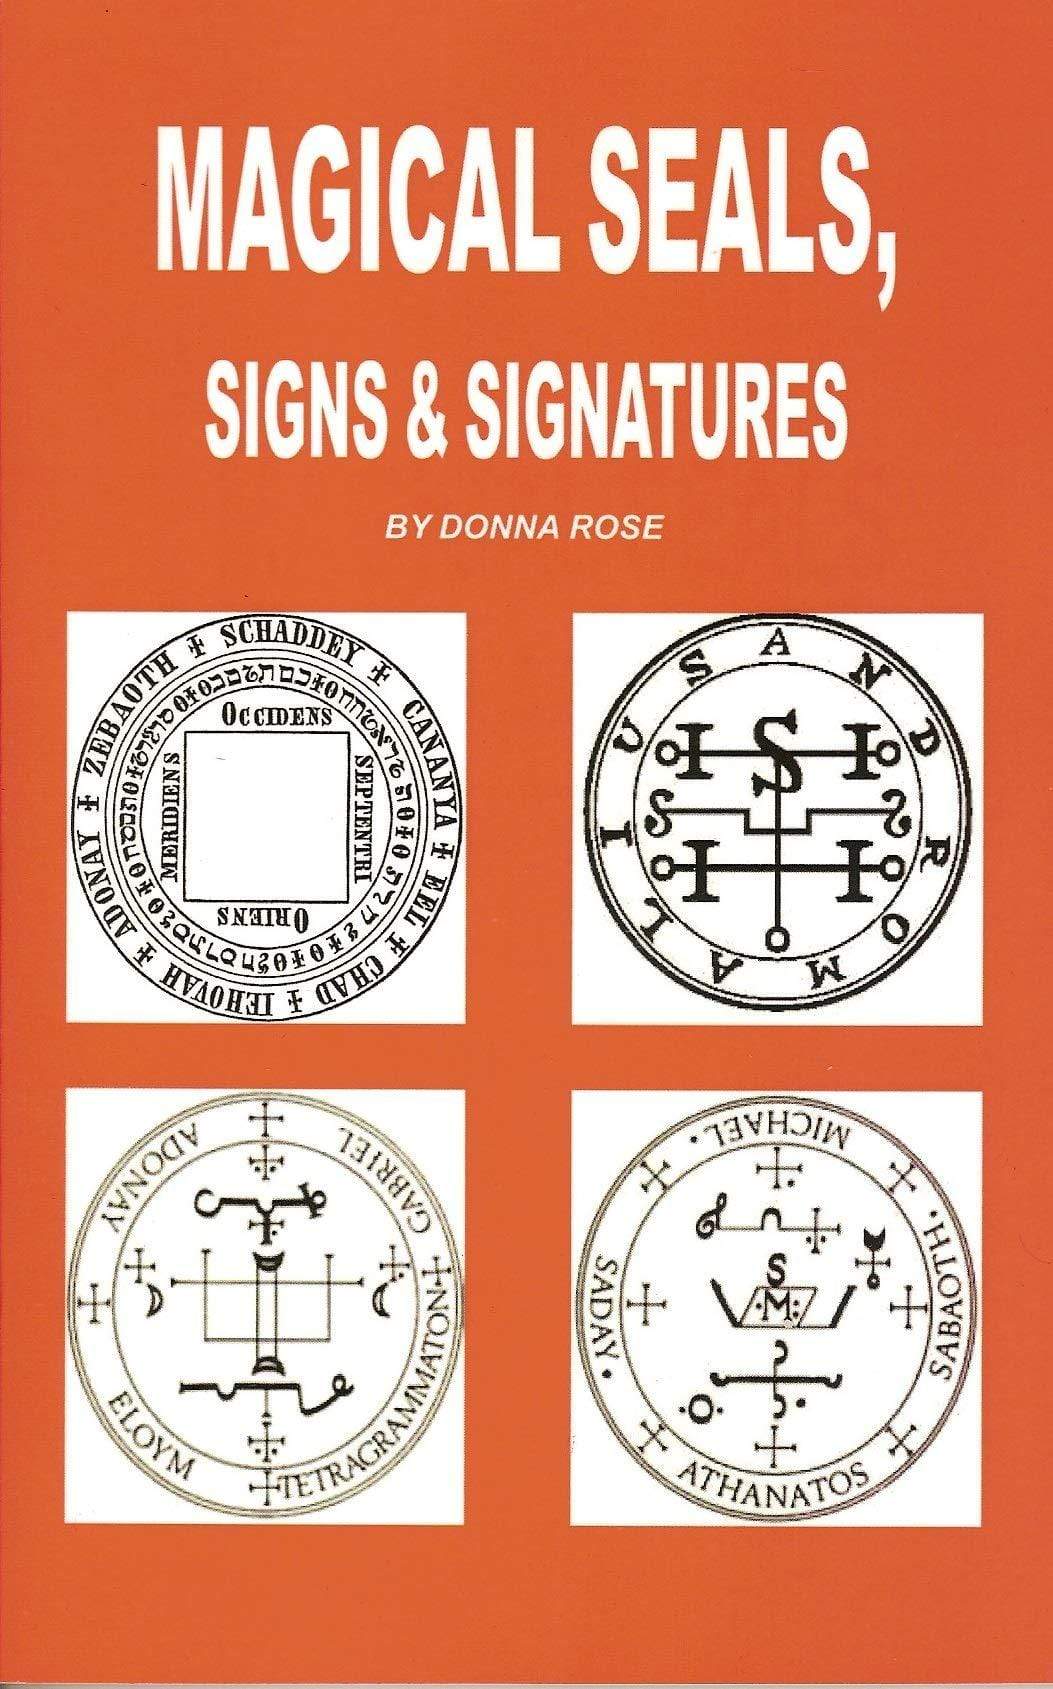 Magical Seals, Signs & Signatures by Donna Rose